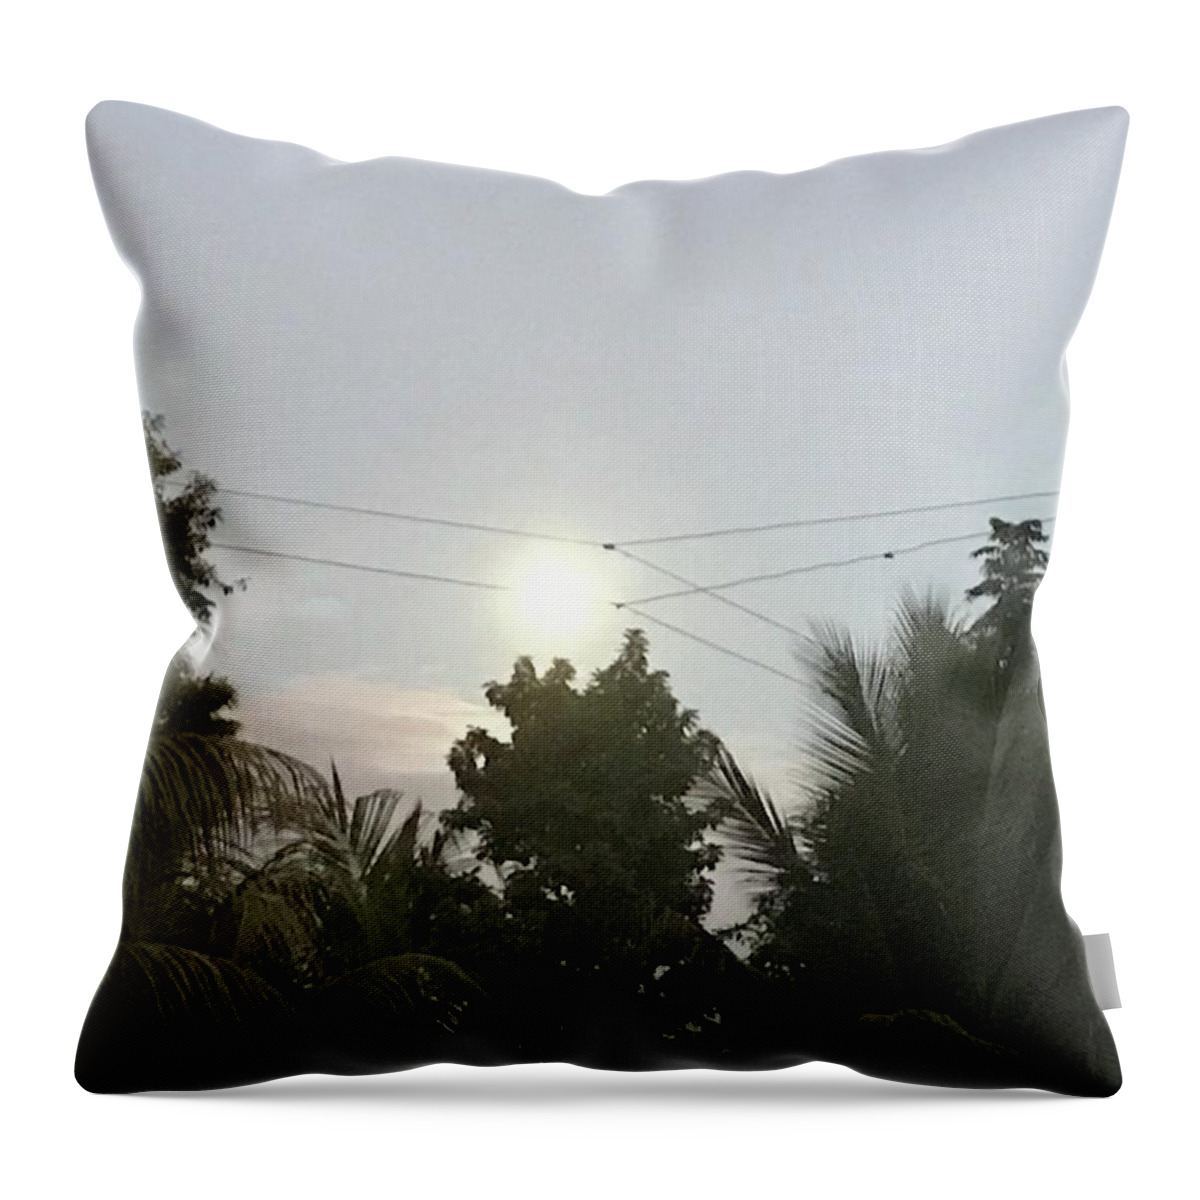 Moon Throw Pillow featuring the photograph Day Moon by Vely